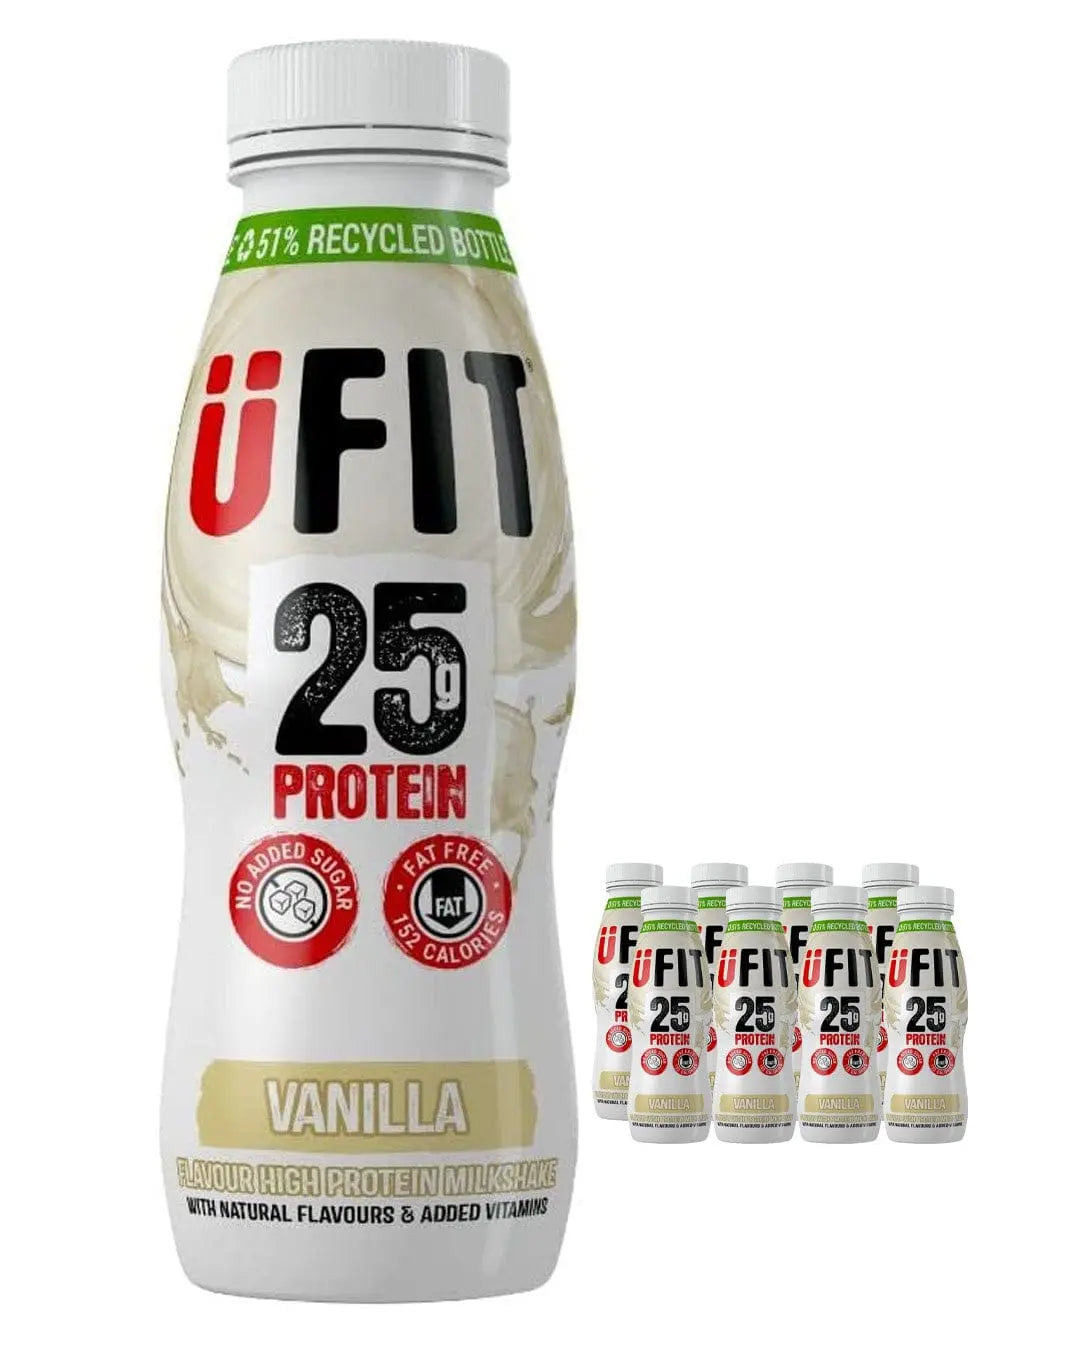 UFIT High Protein Shake Drink Vanilla Multipack, 8 x 310 ml Soft Drinks & Mixers